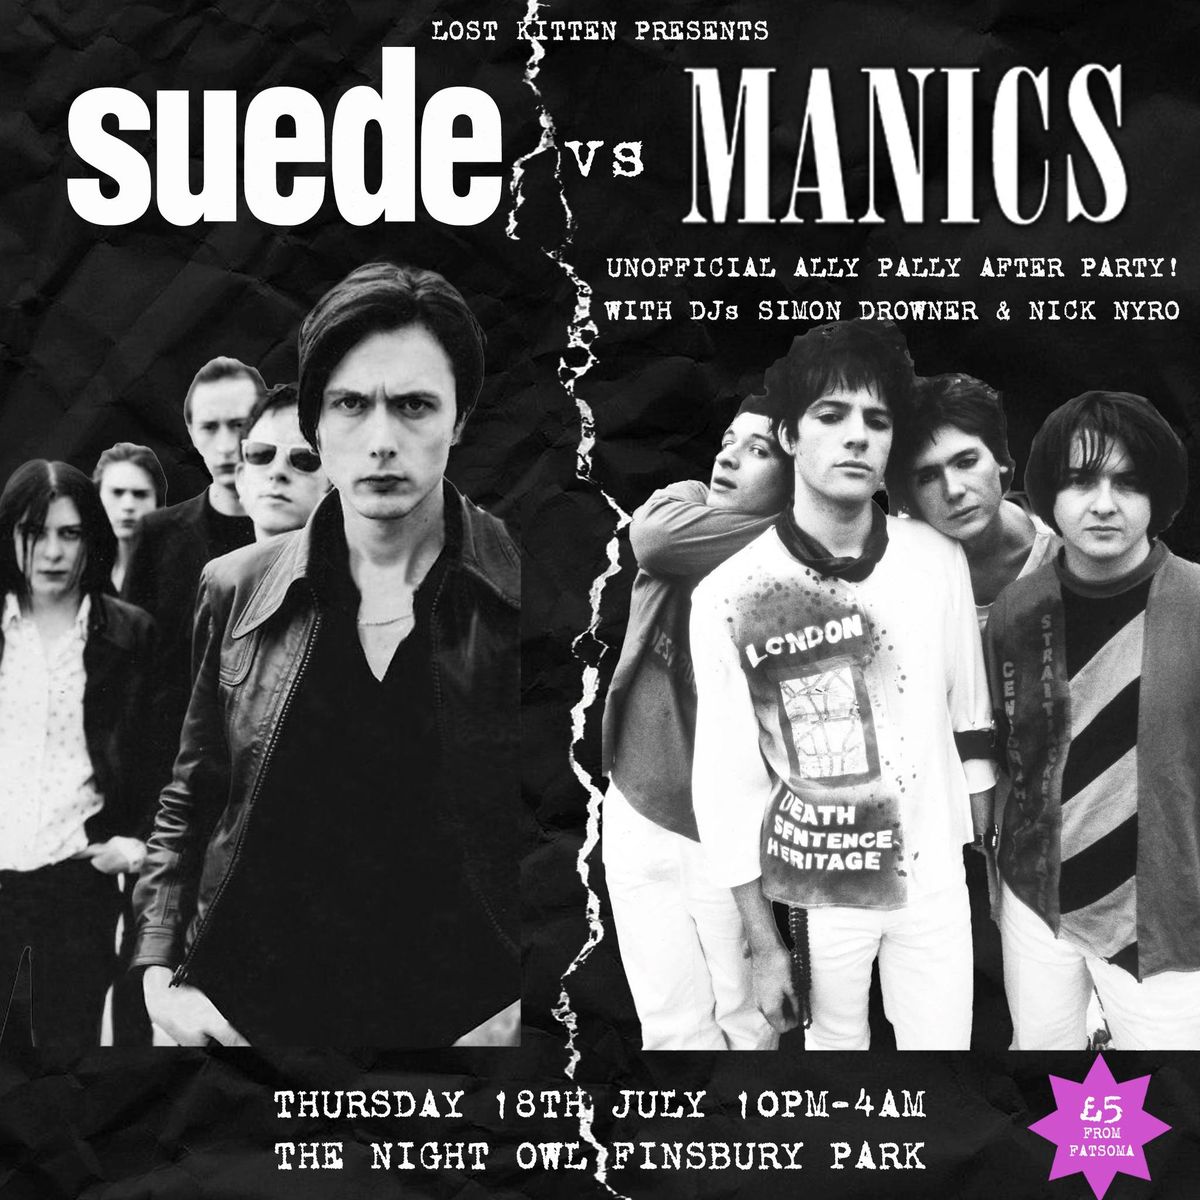 SUEDE vs MANICS AFTER PARTY!